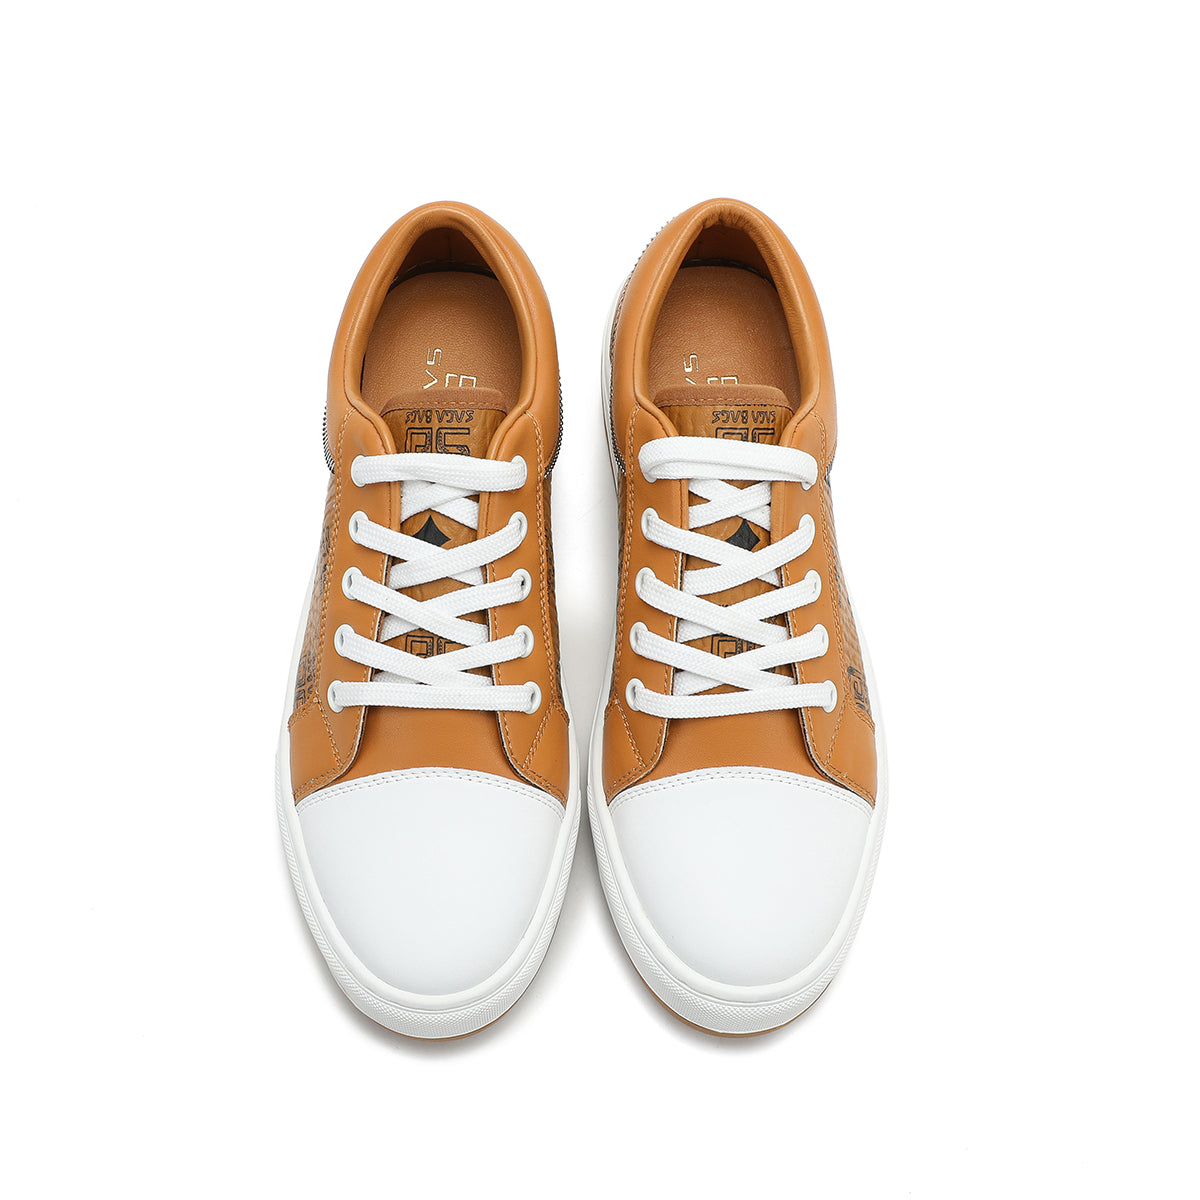 Women's Saga sneakers in luxurious leather with a bold design